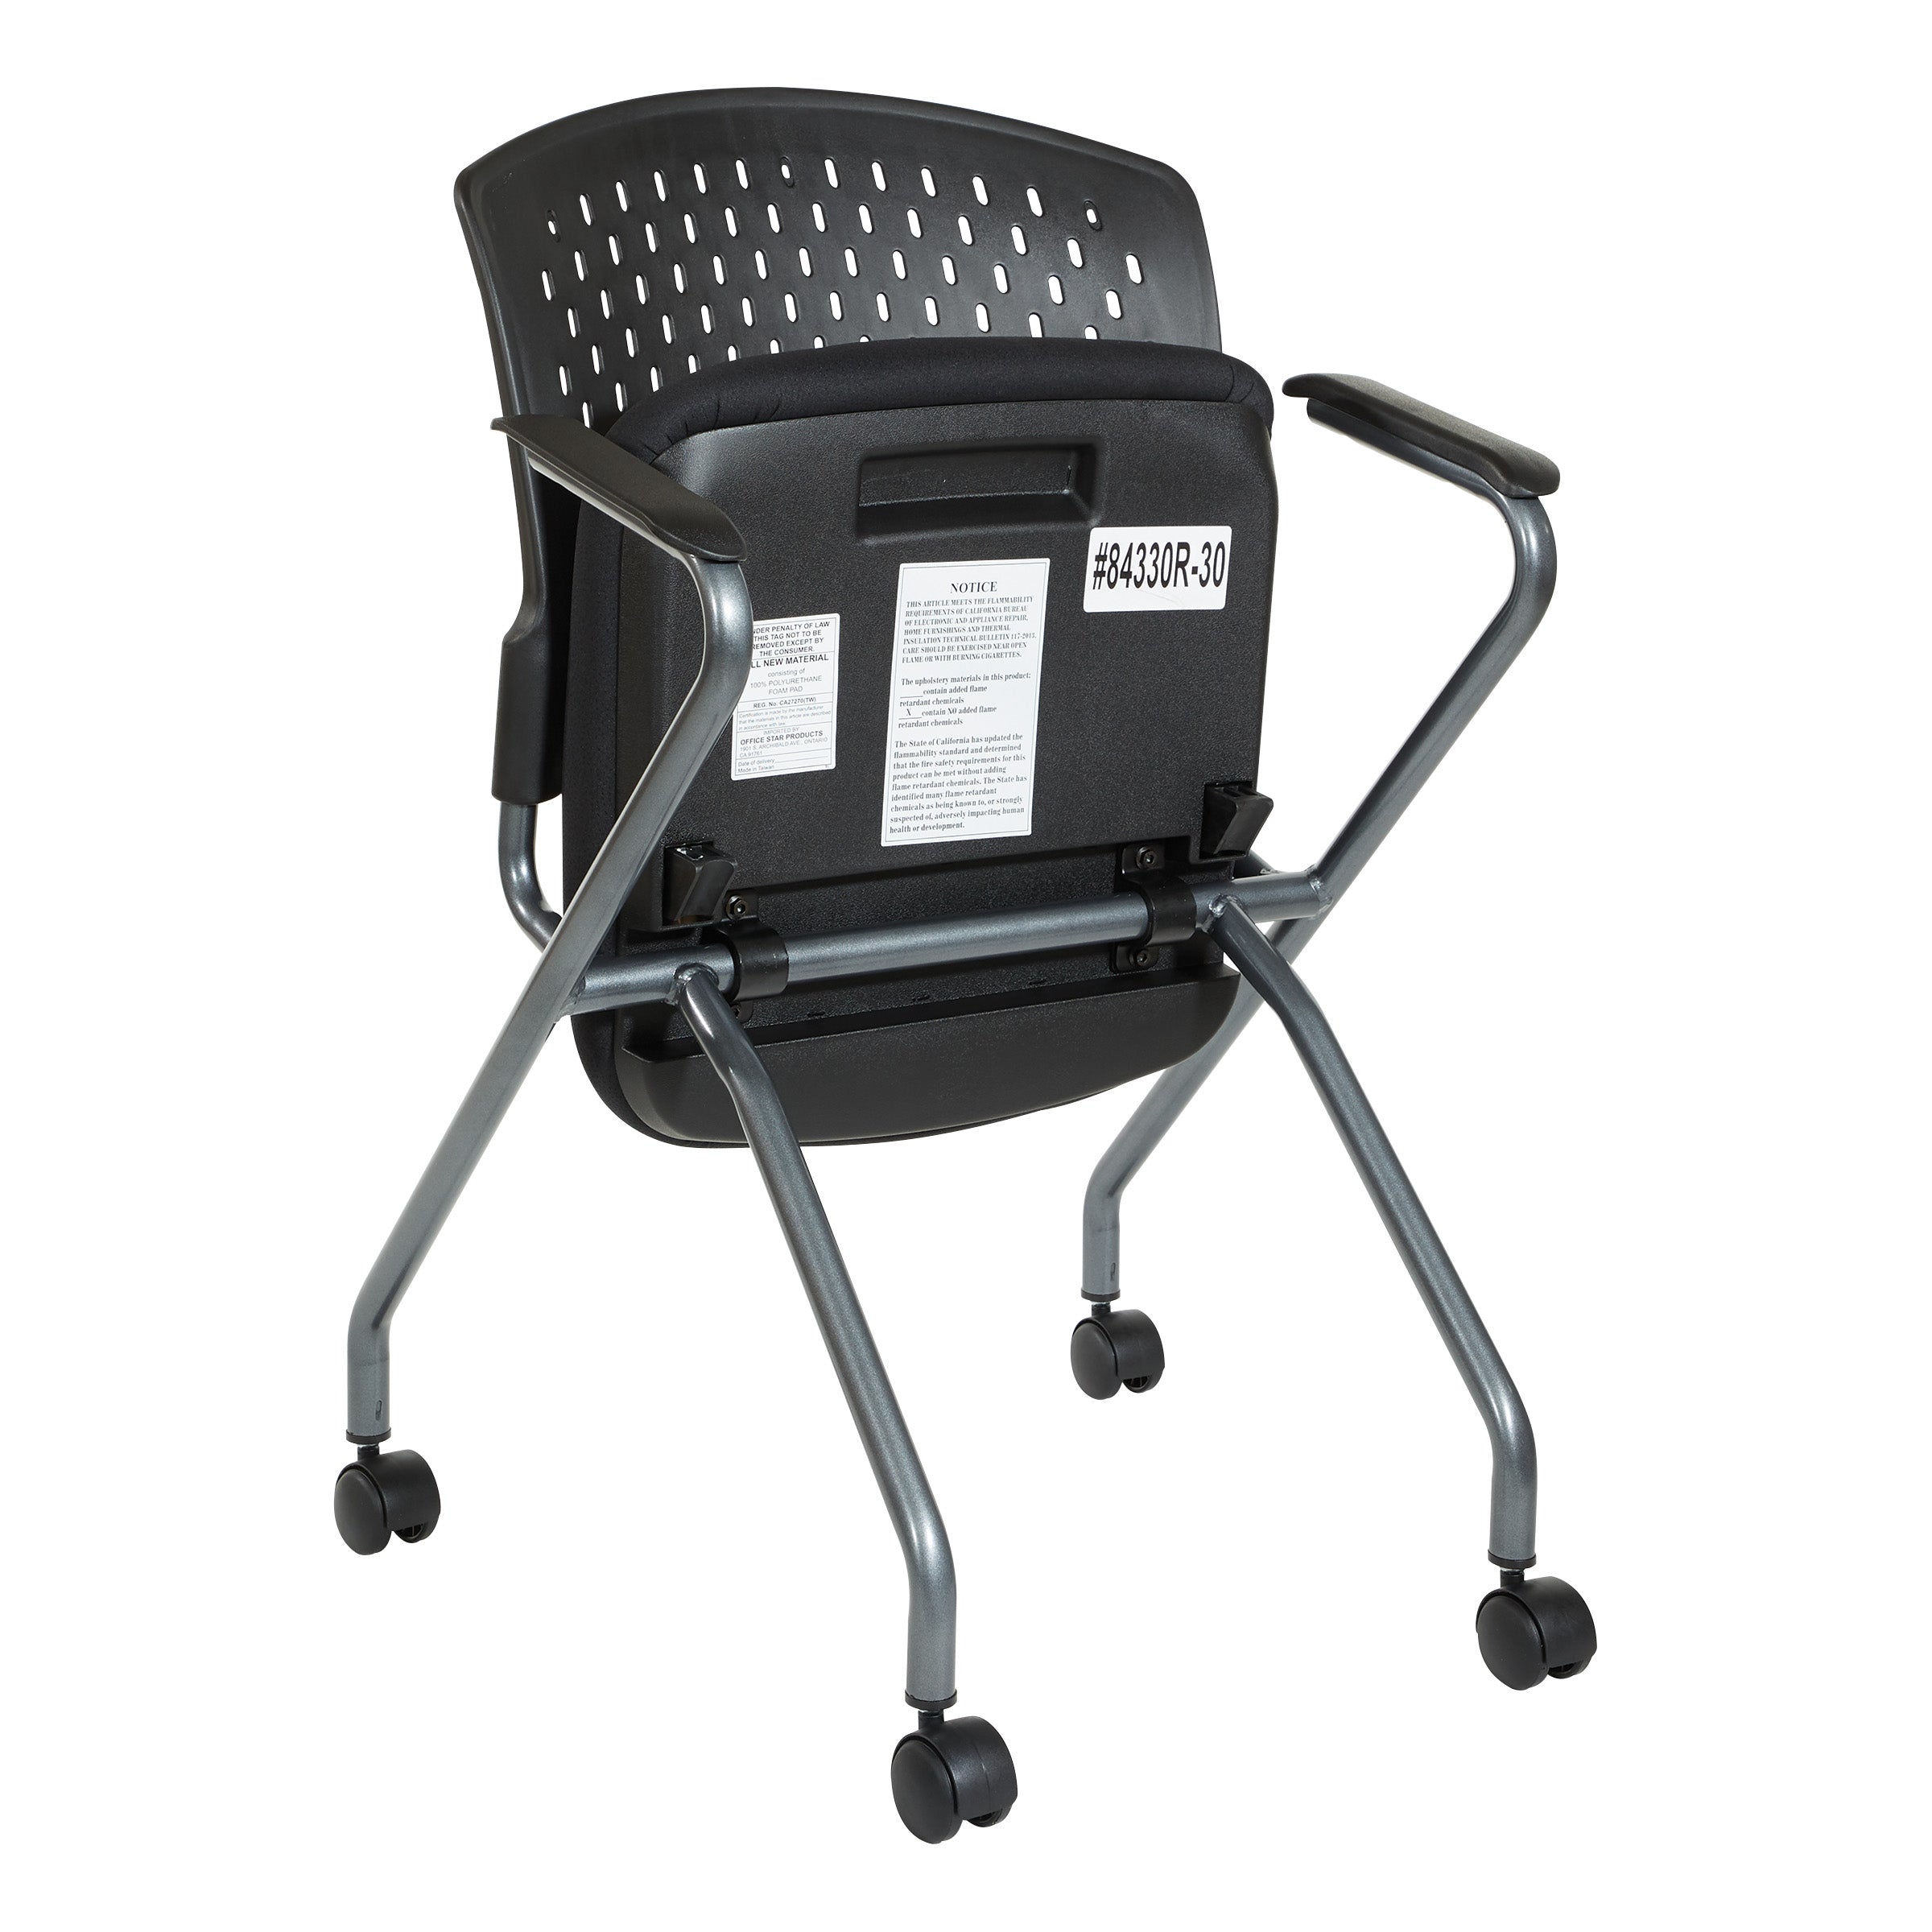 84330 - Ventilated Plastic Wrap Around Back Folding Chair with Arms (2/Pk)